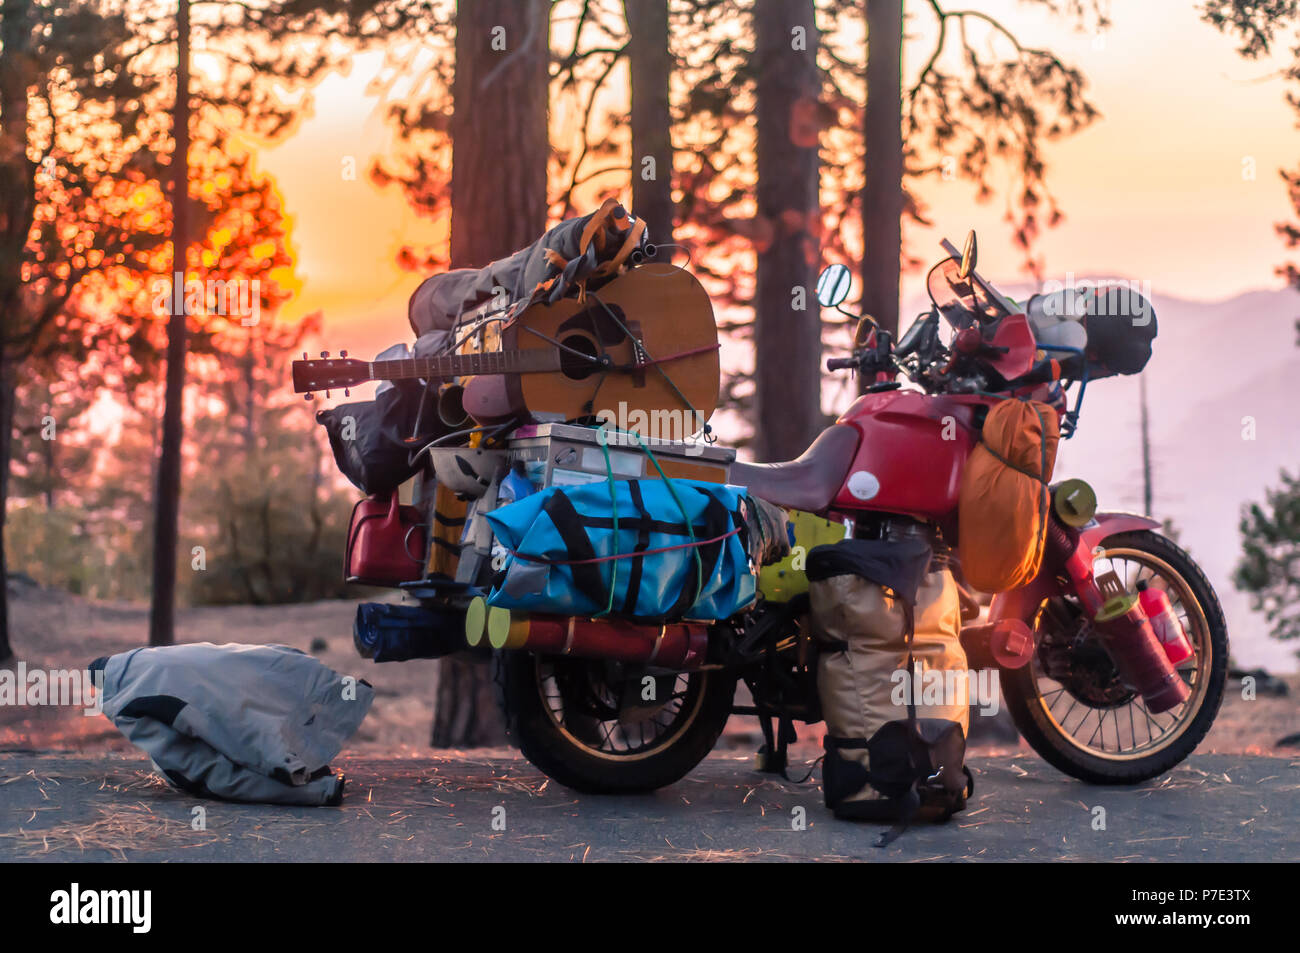 Part unloaded touring motorcycle parked on forest roadside at sunset, Yosemite National Park, California, USA Stock Photo